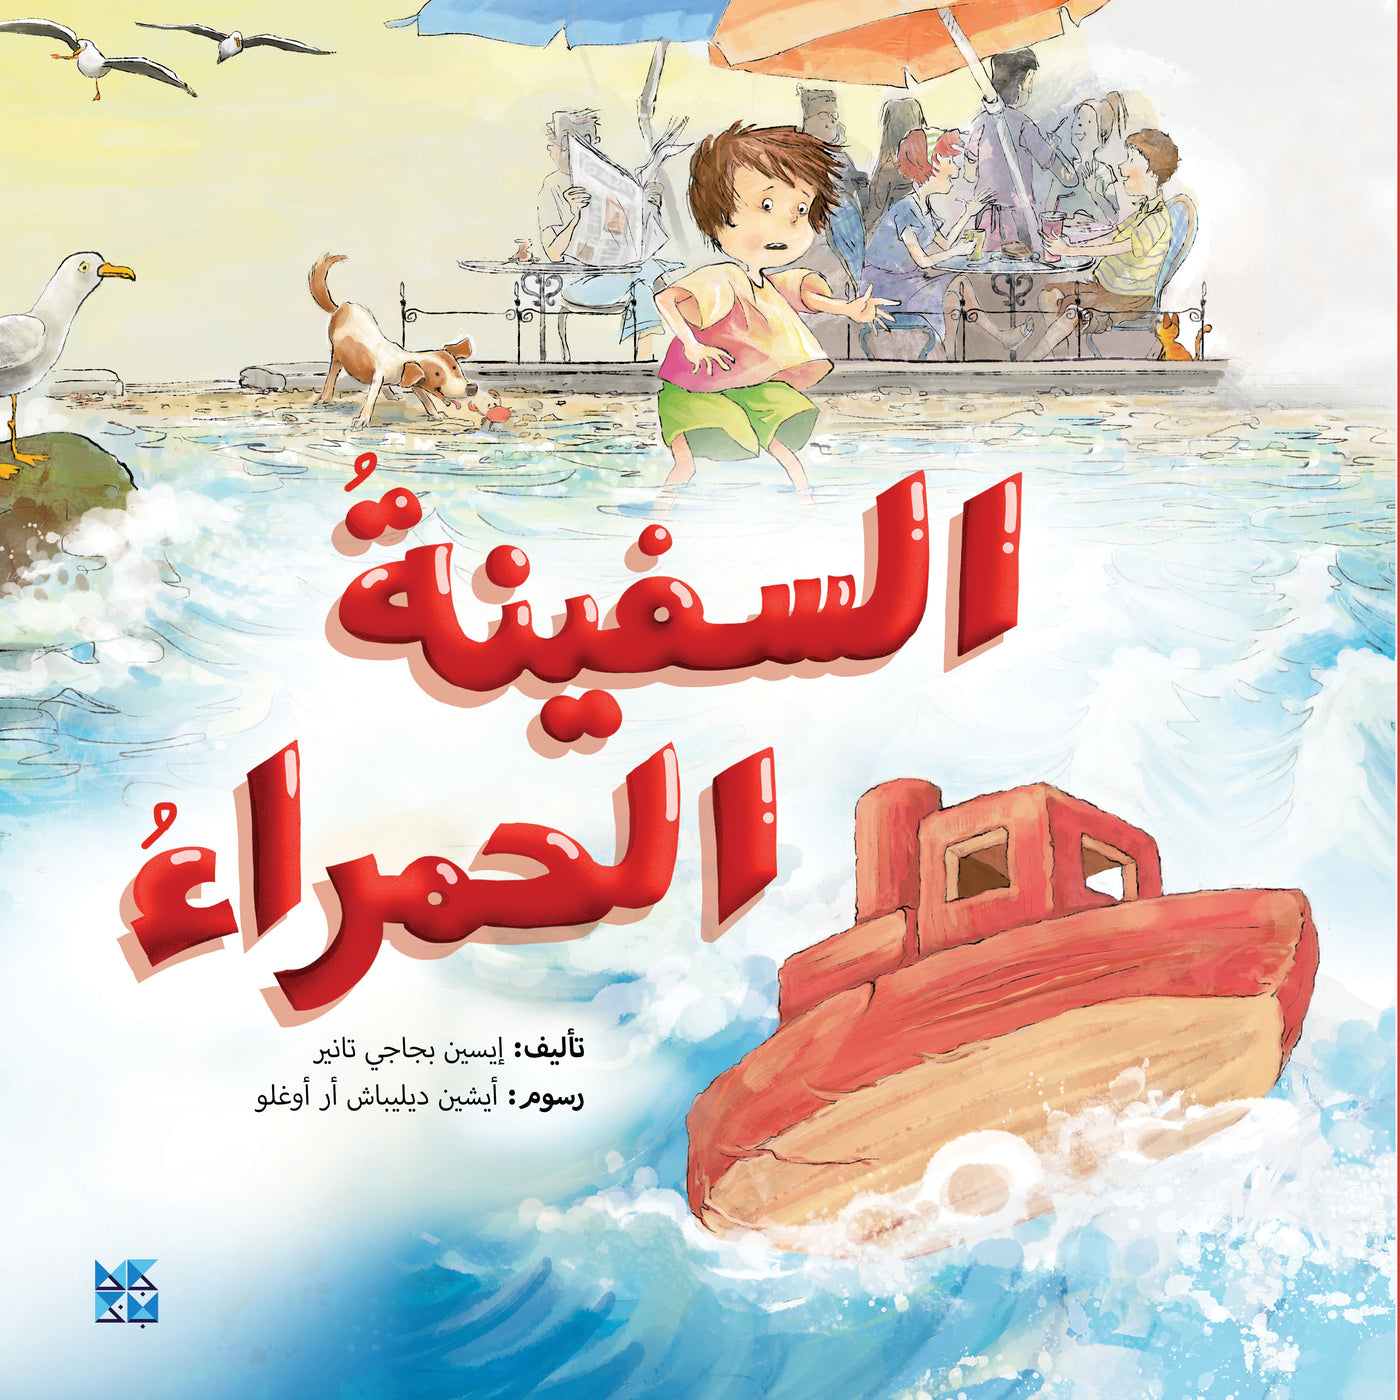 All About Kids Series: Red Ship - Book Cover